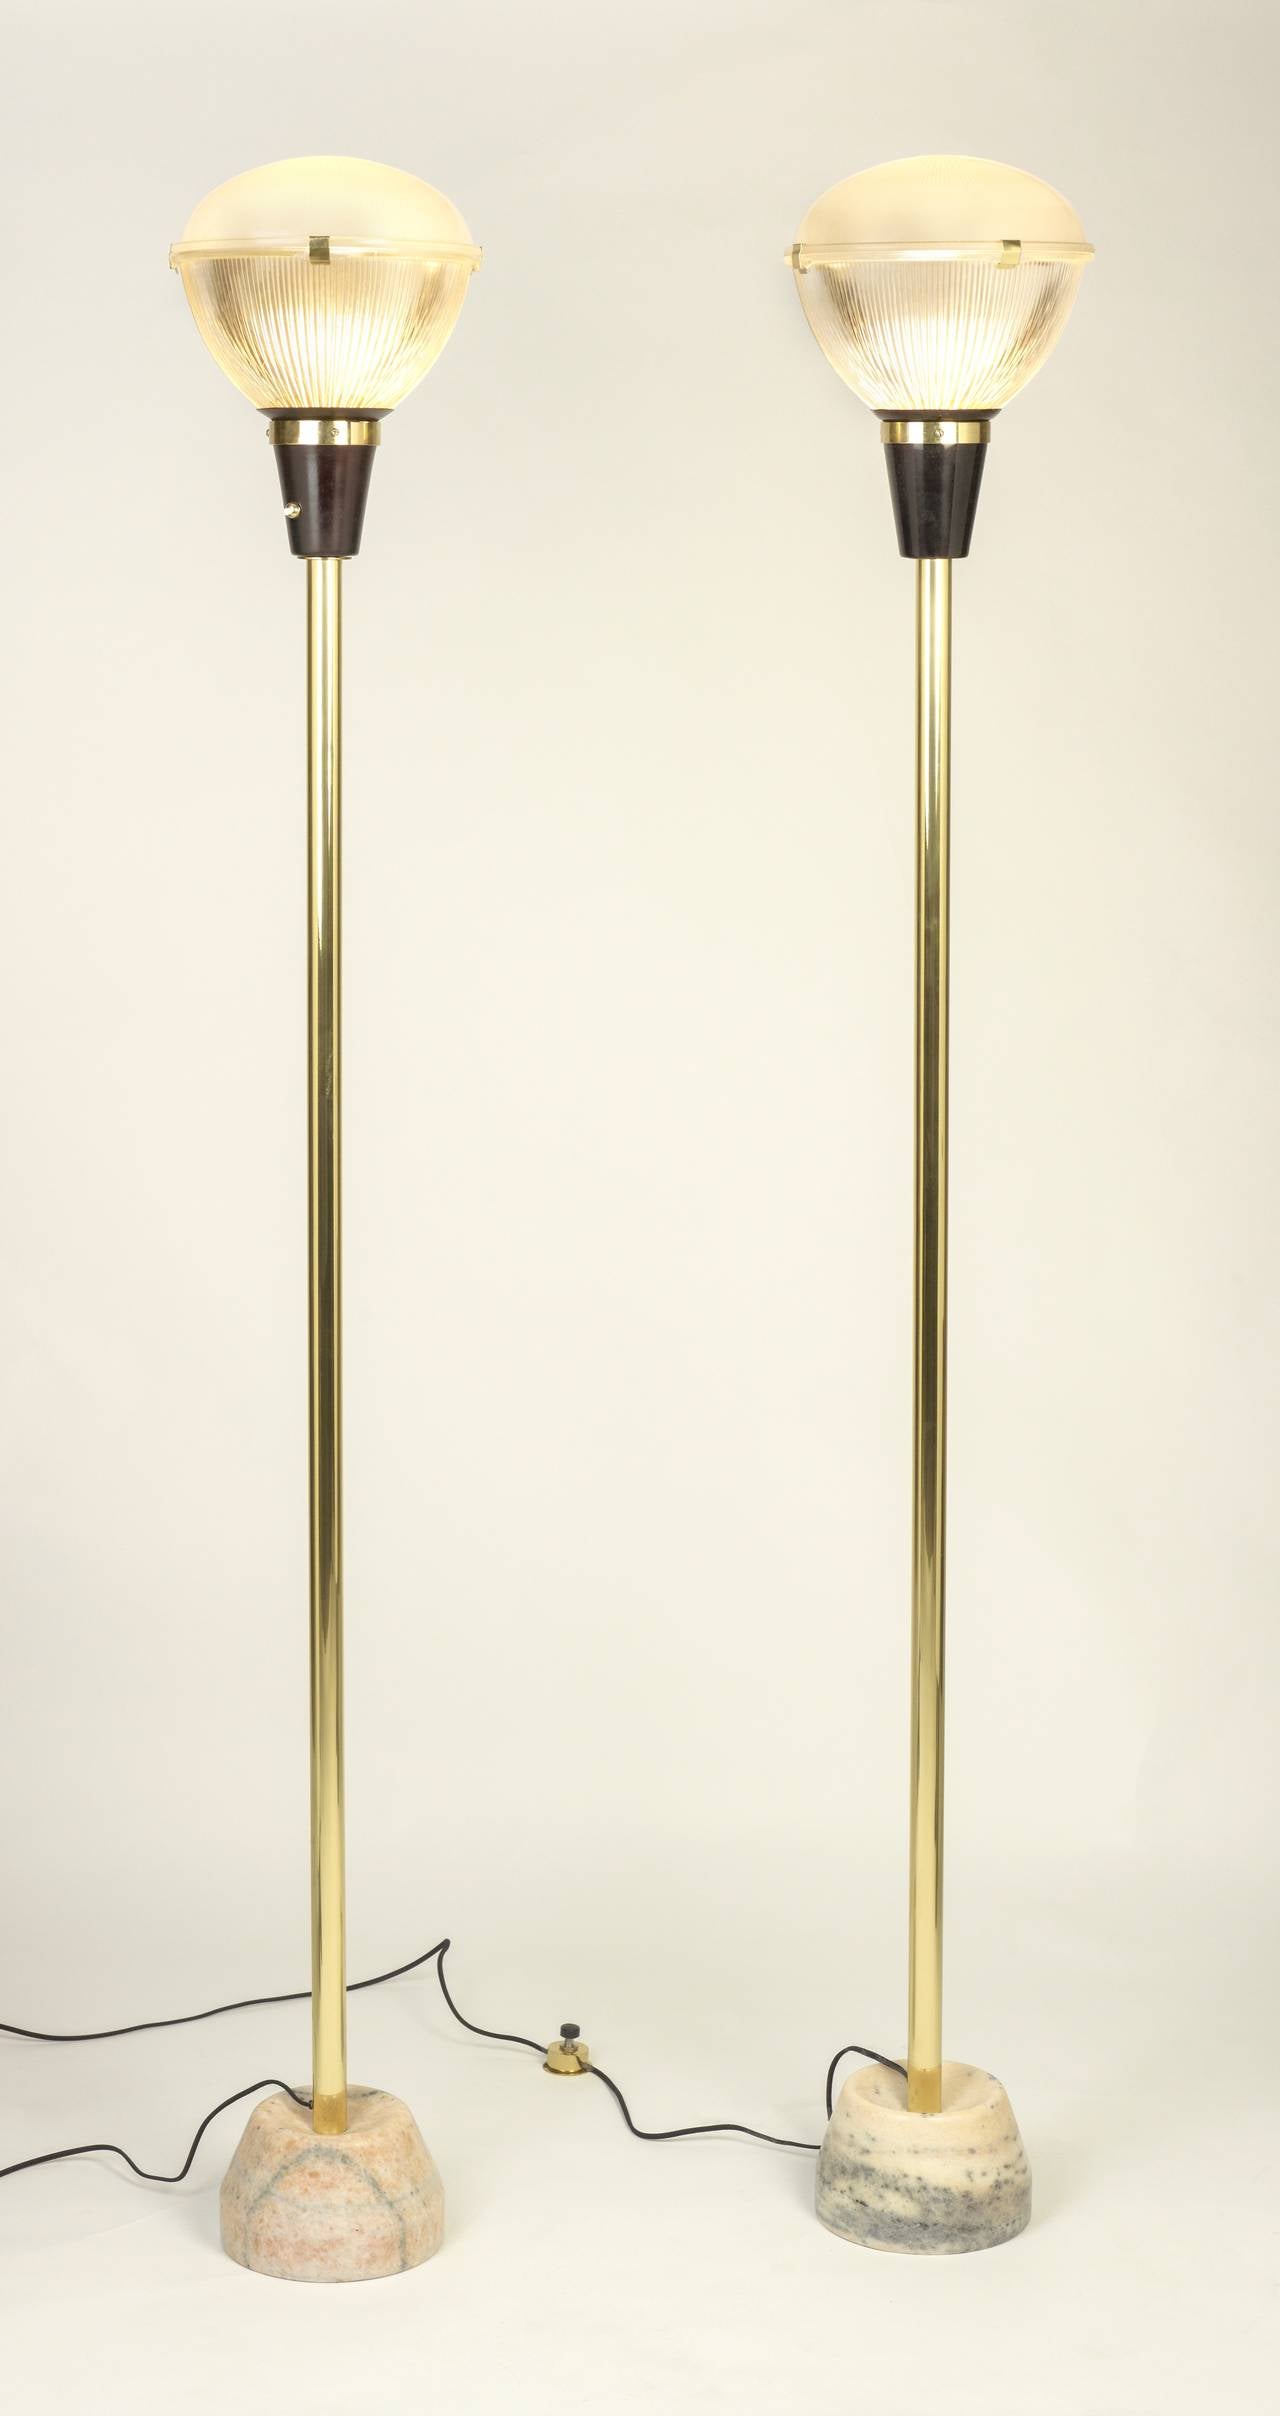 Ignazio Gardella.
Floor lamps model lte7, can be sold as pair or separately. 
Coppa Chiusa,
Italy, 1955.
Manufactured by Azucena.
Brass, marble, glass.
Measures: 70 H x 13 D inches.